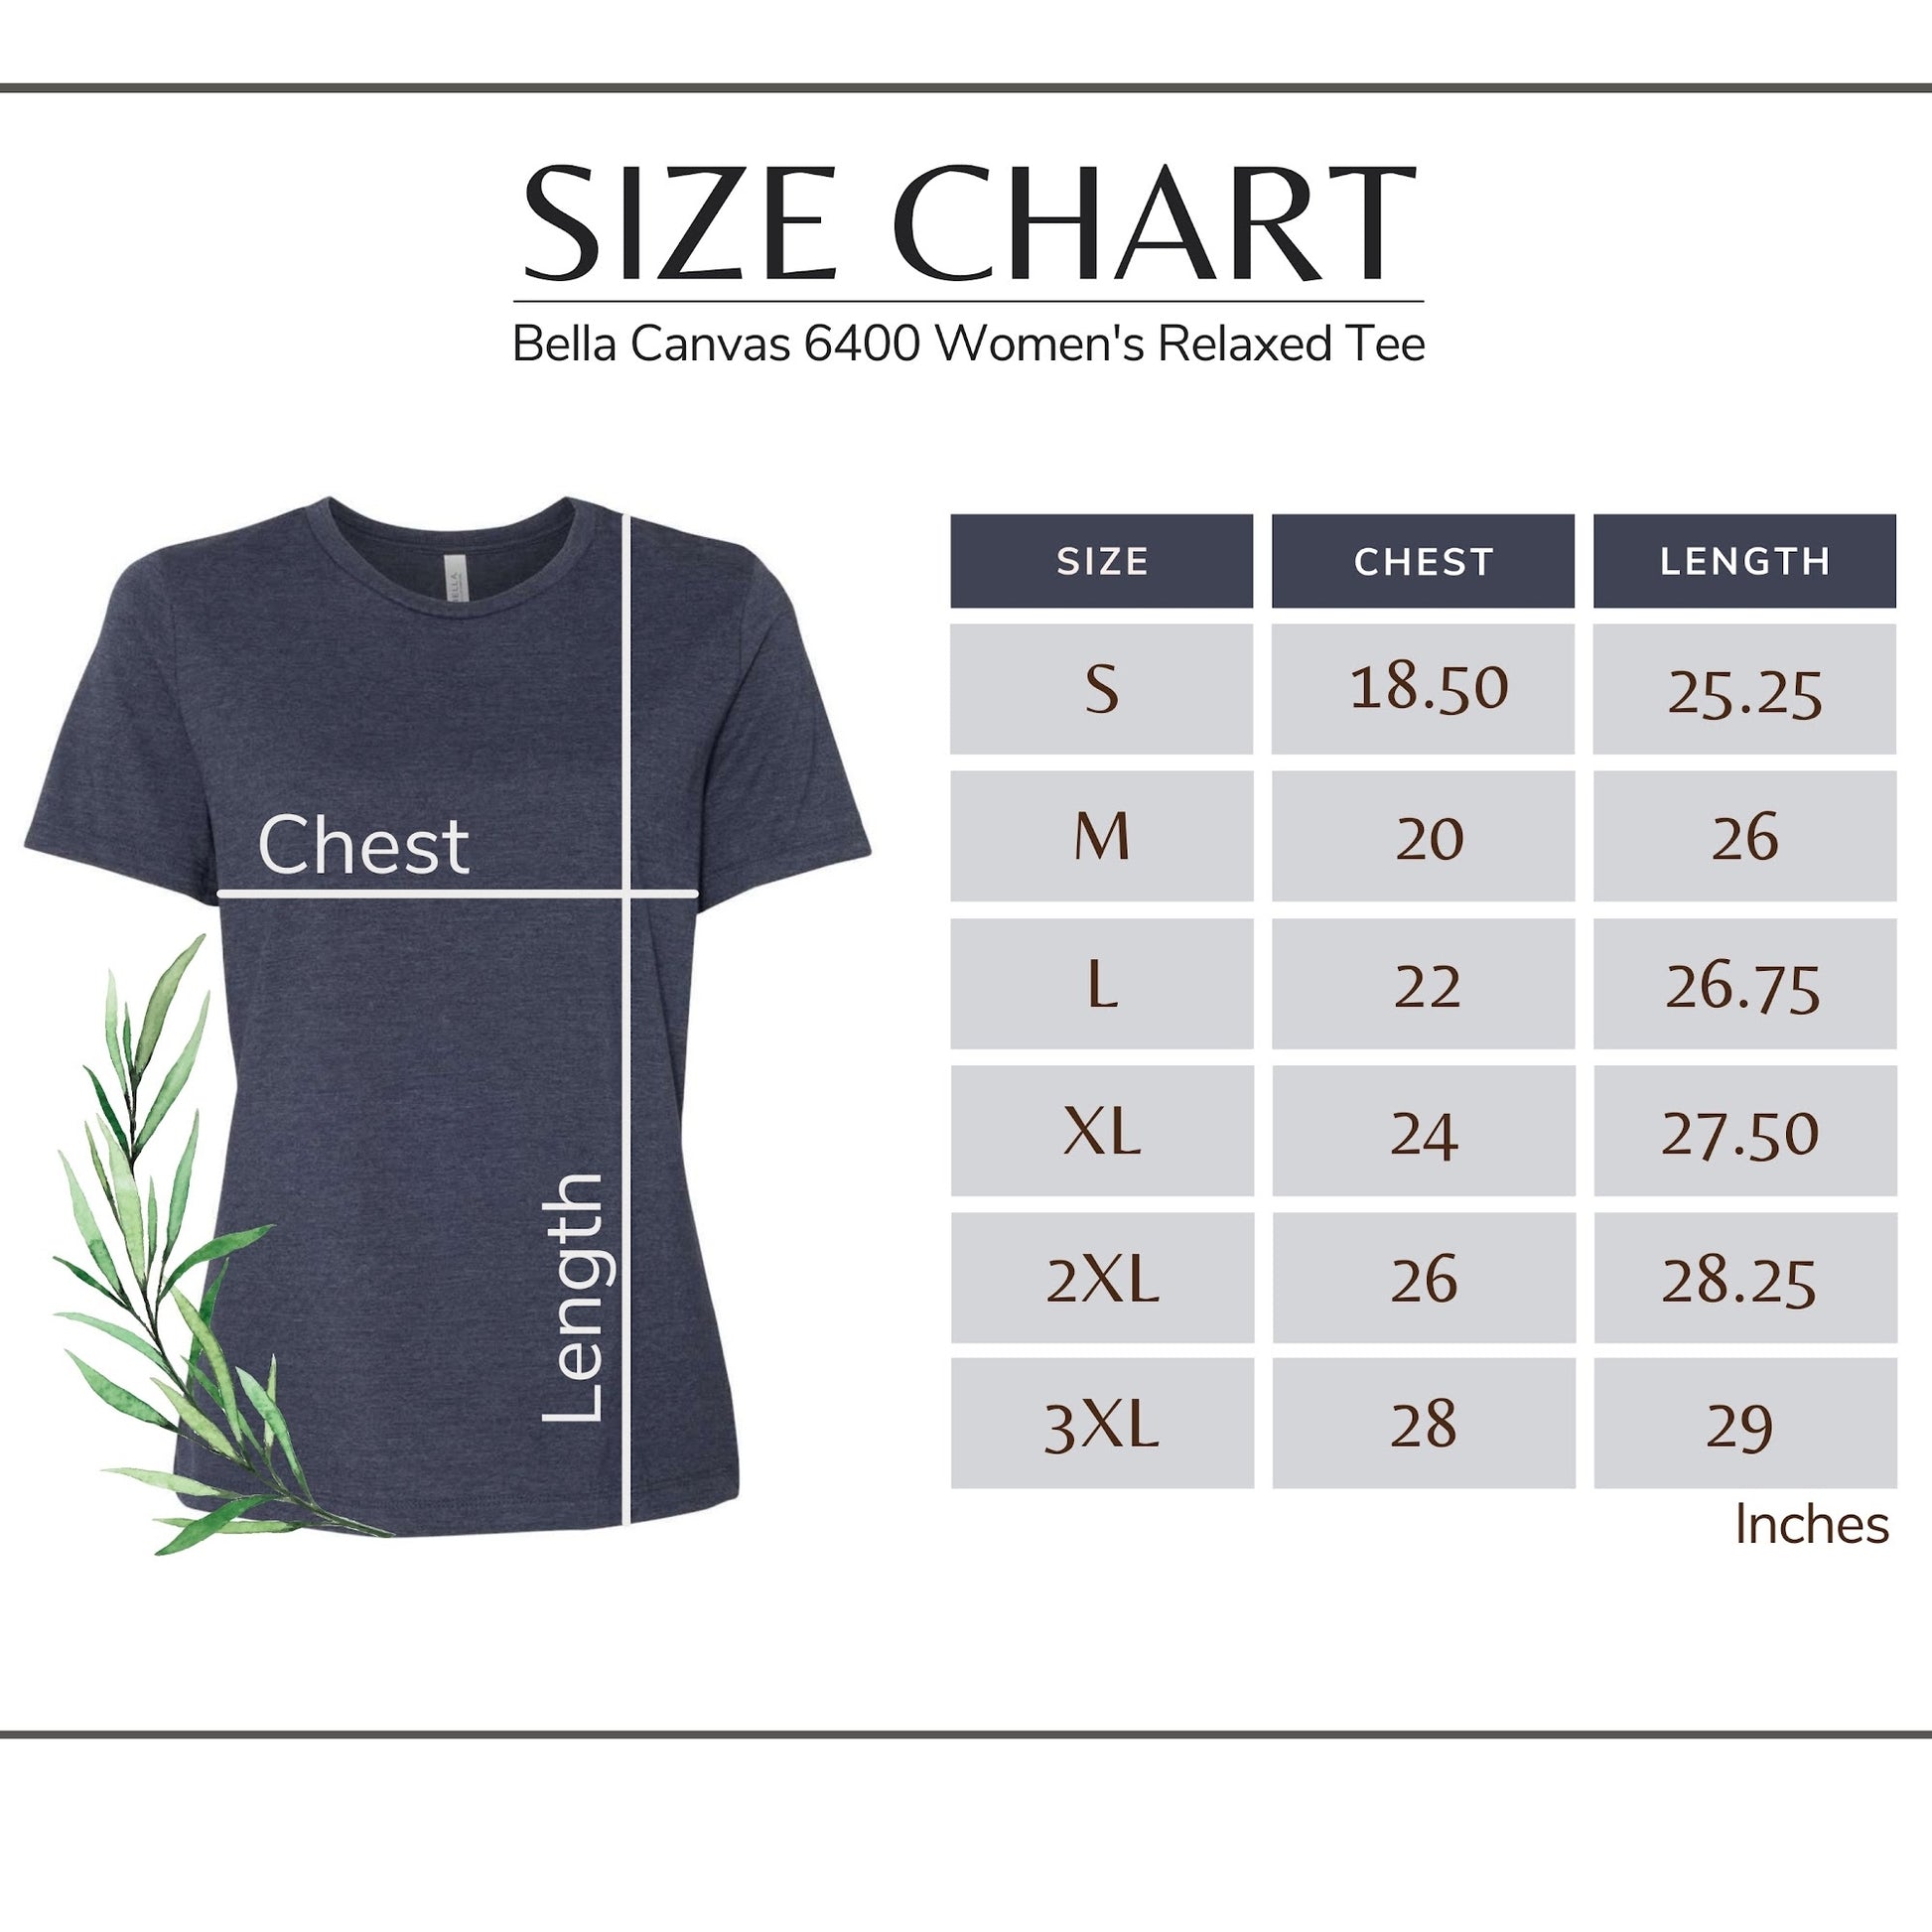 Size chart for this t-shirt